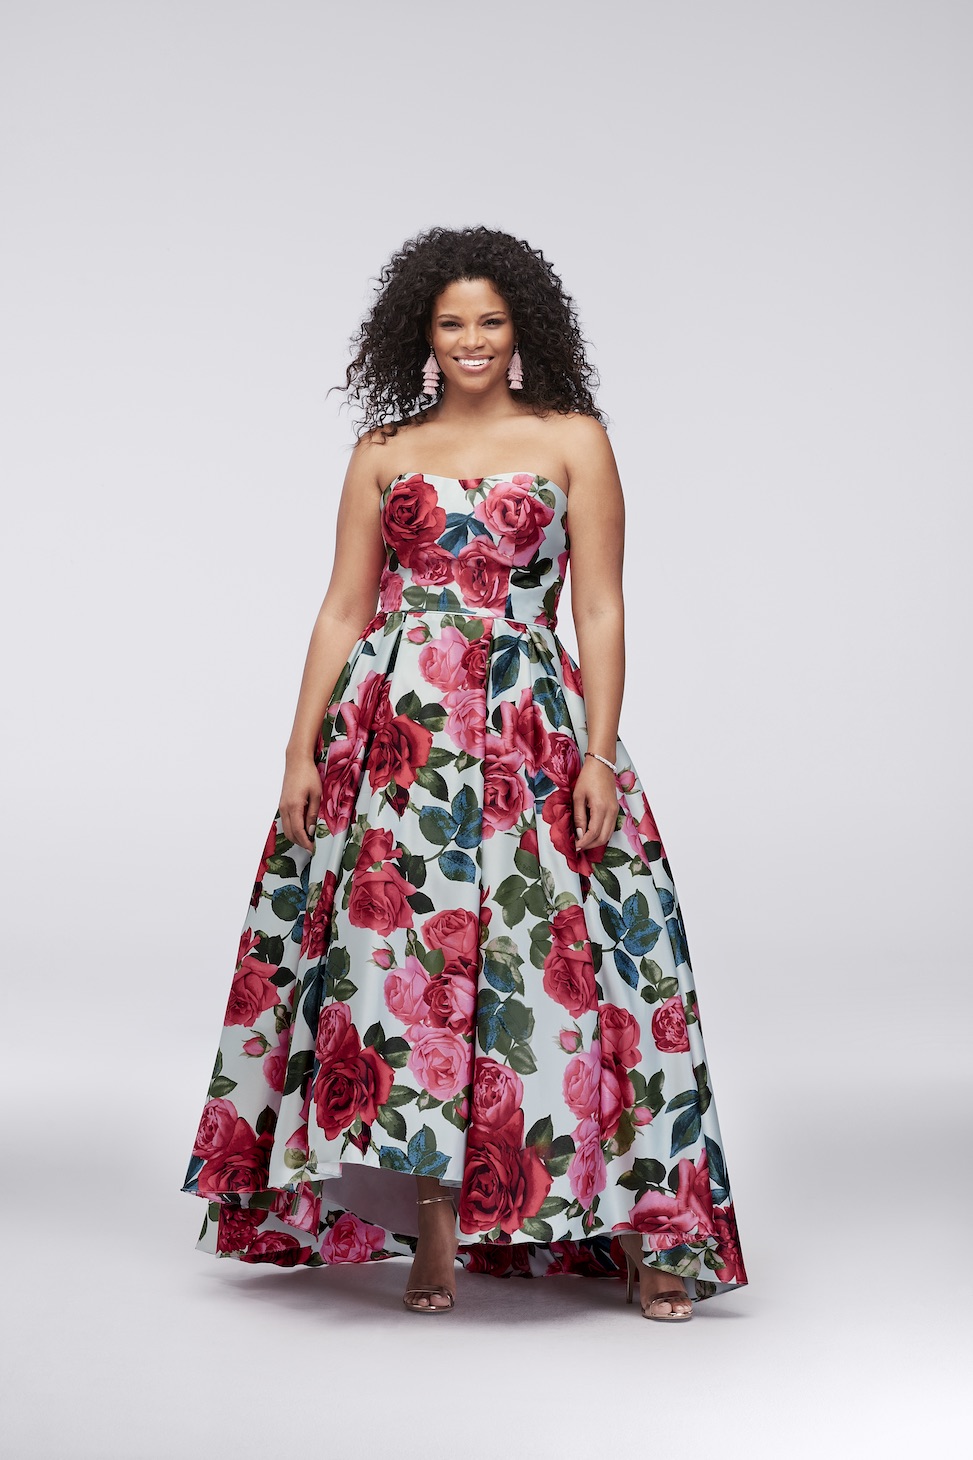 plus size woman wearing a high-low satin strapless floral evening ball gown from david's bridal